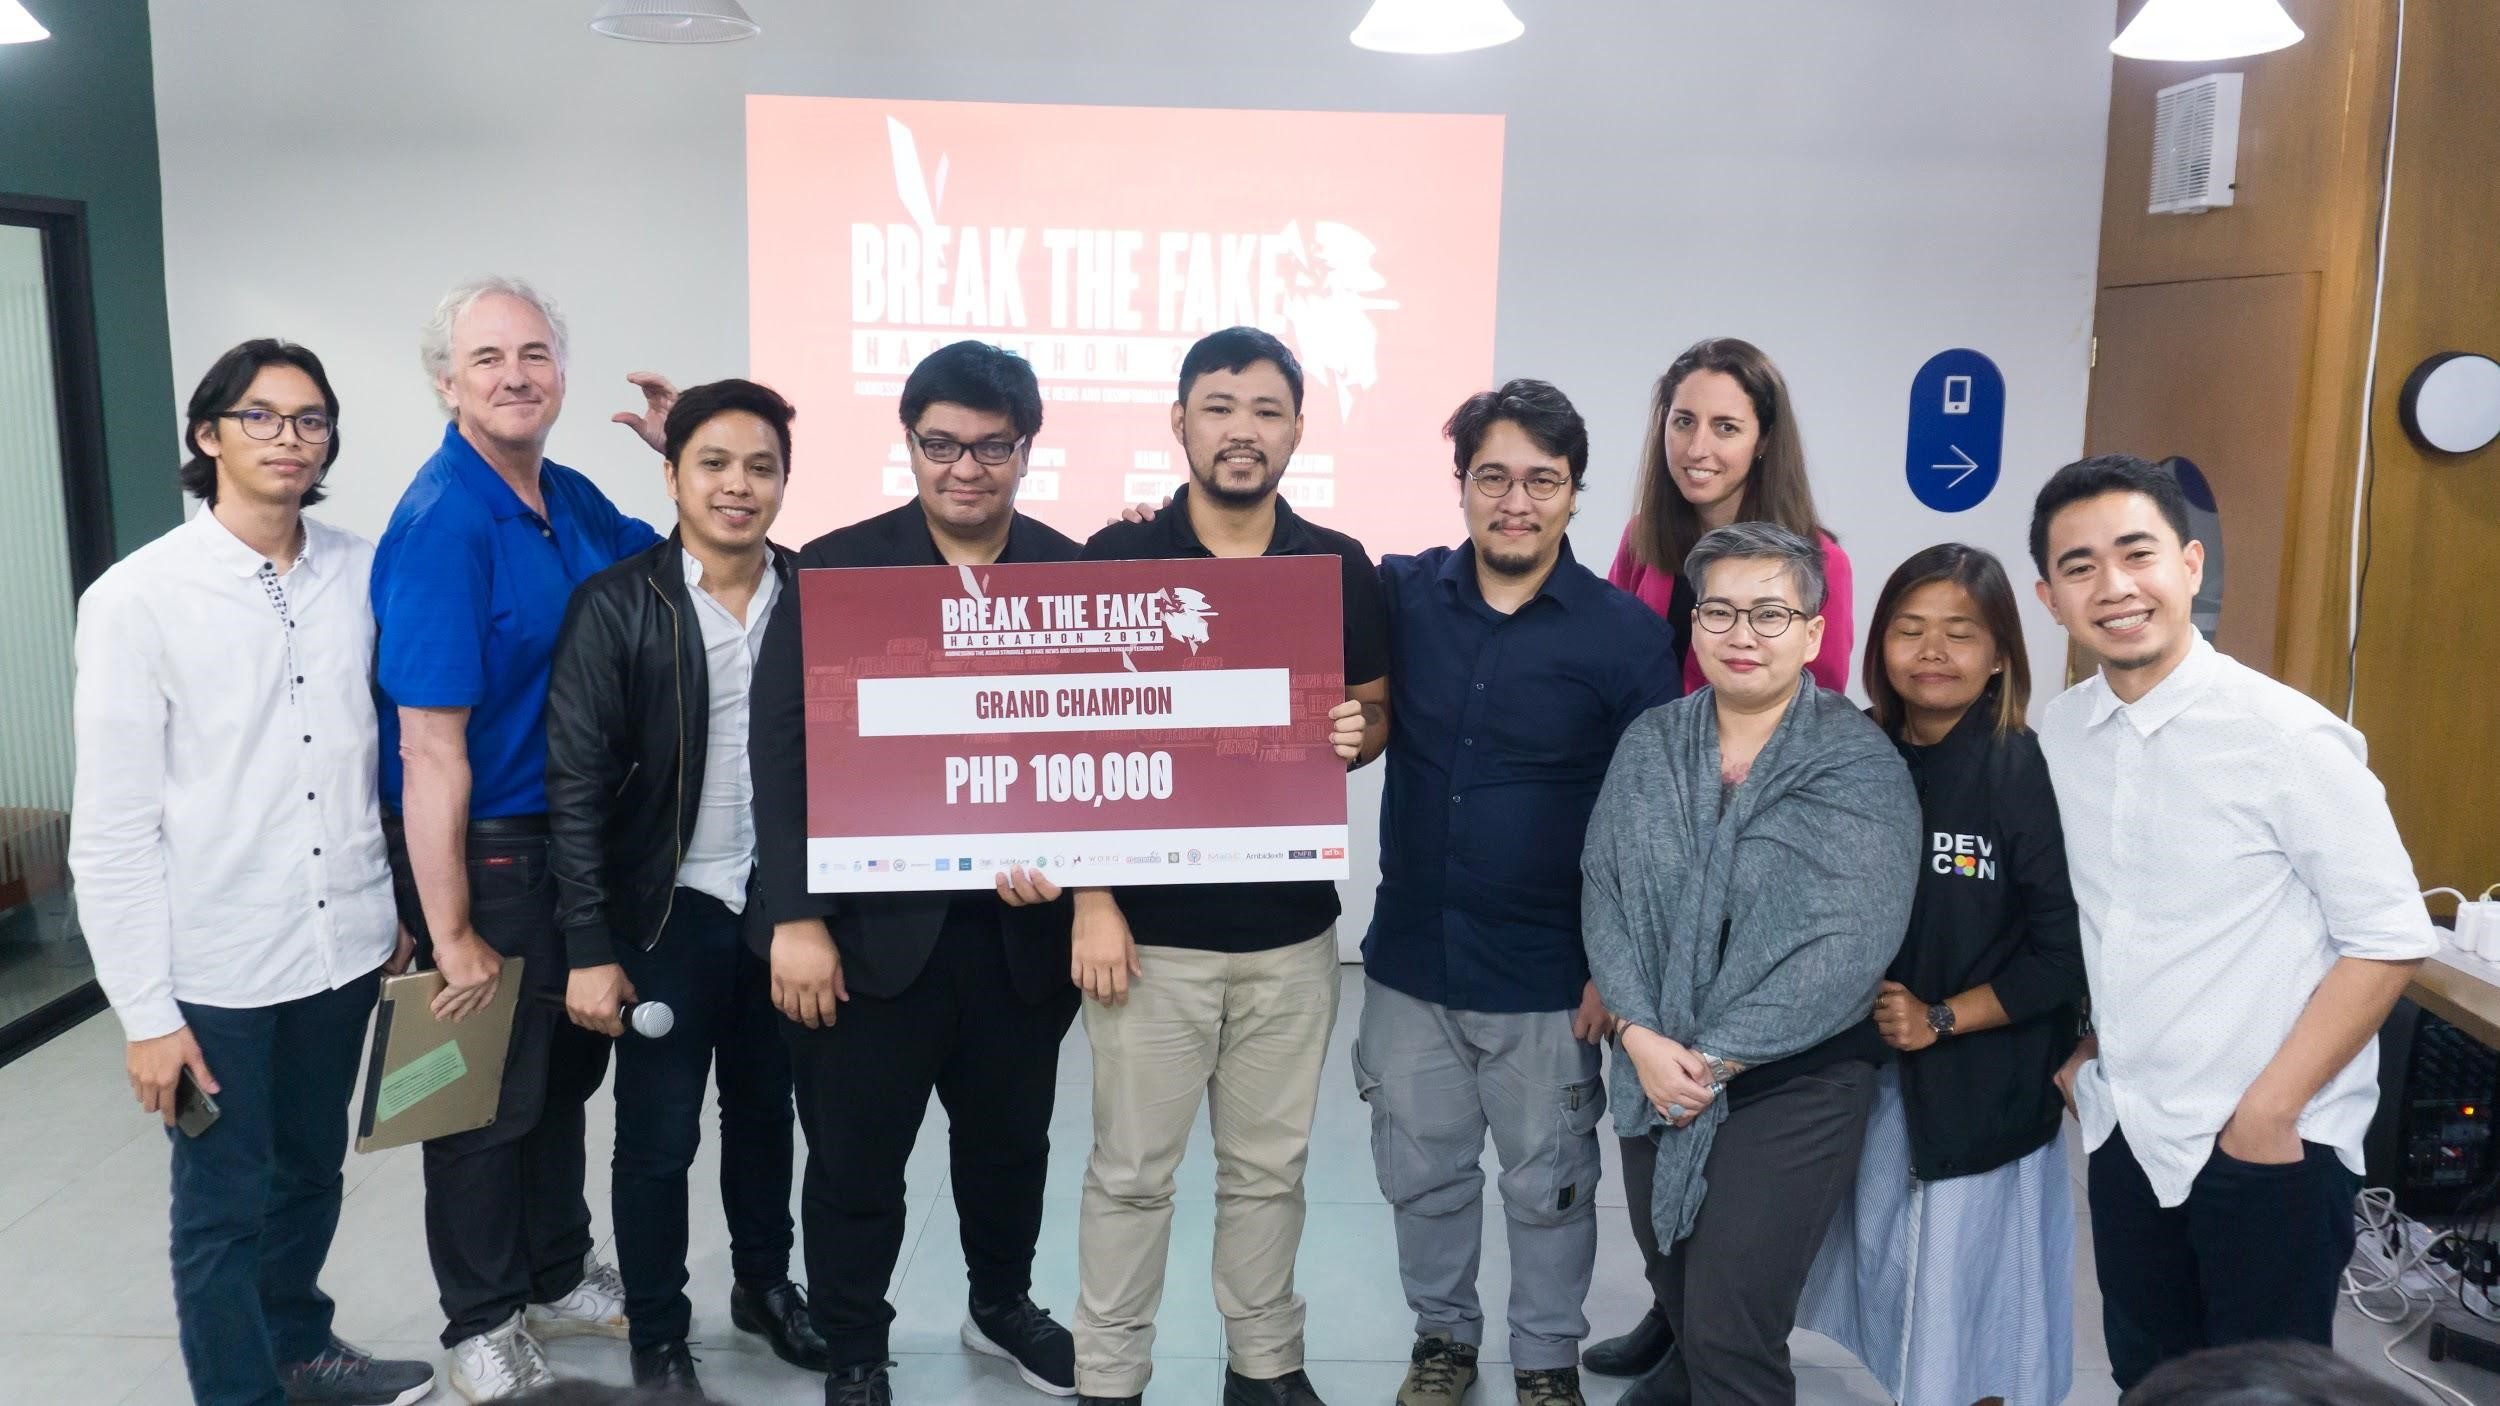 Filipino programmers and developers wins at the first Break the Fake Grand Hackathon last 2019